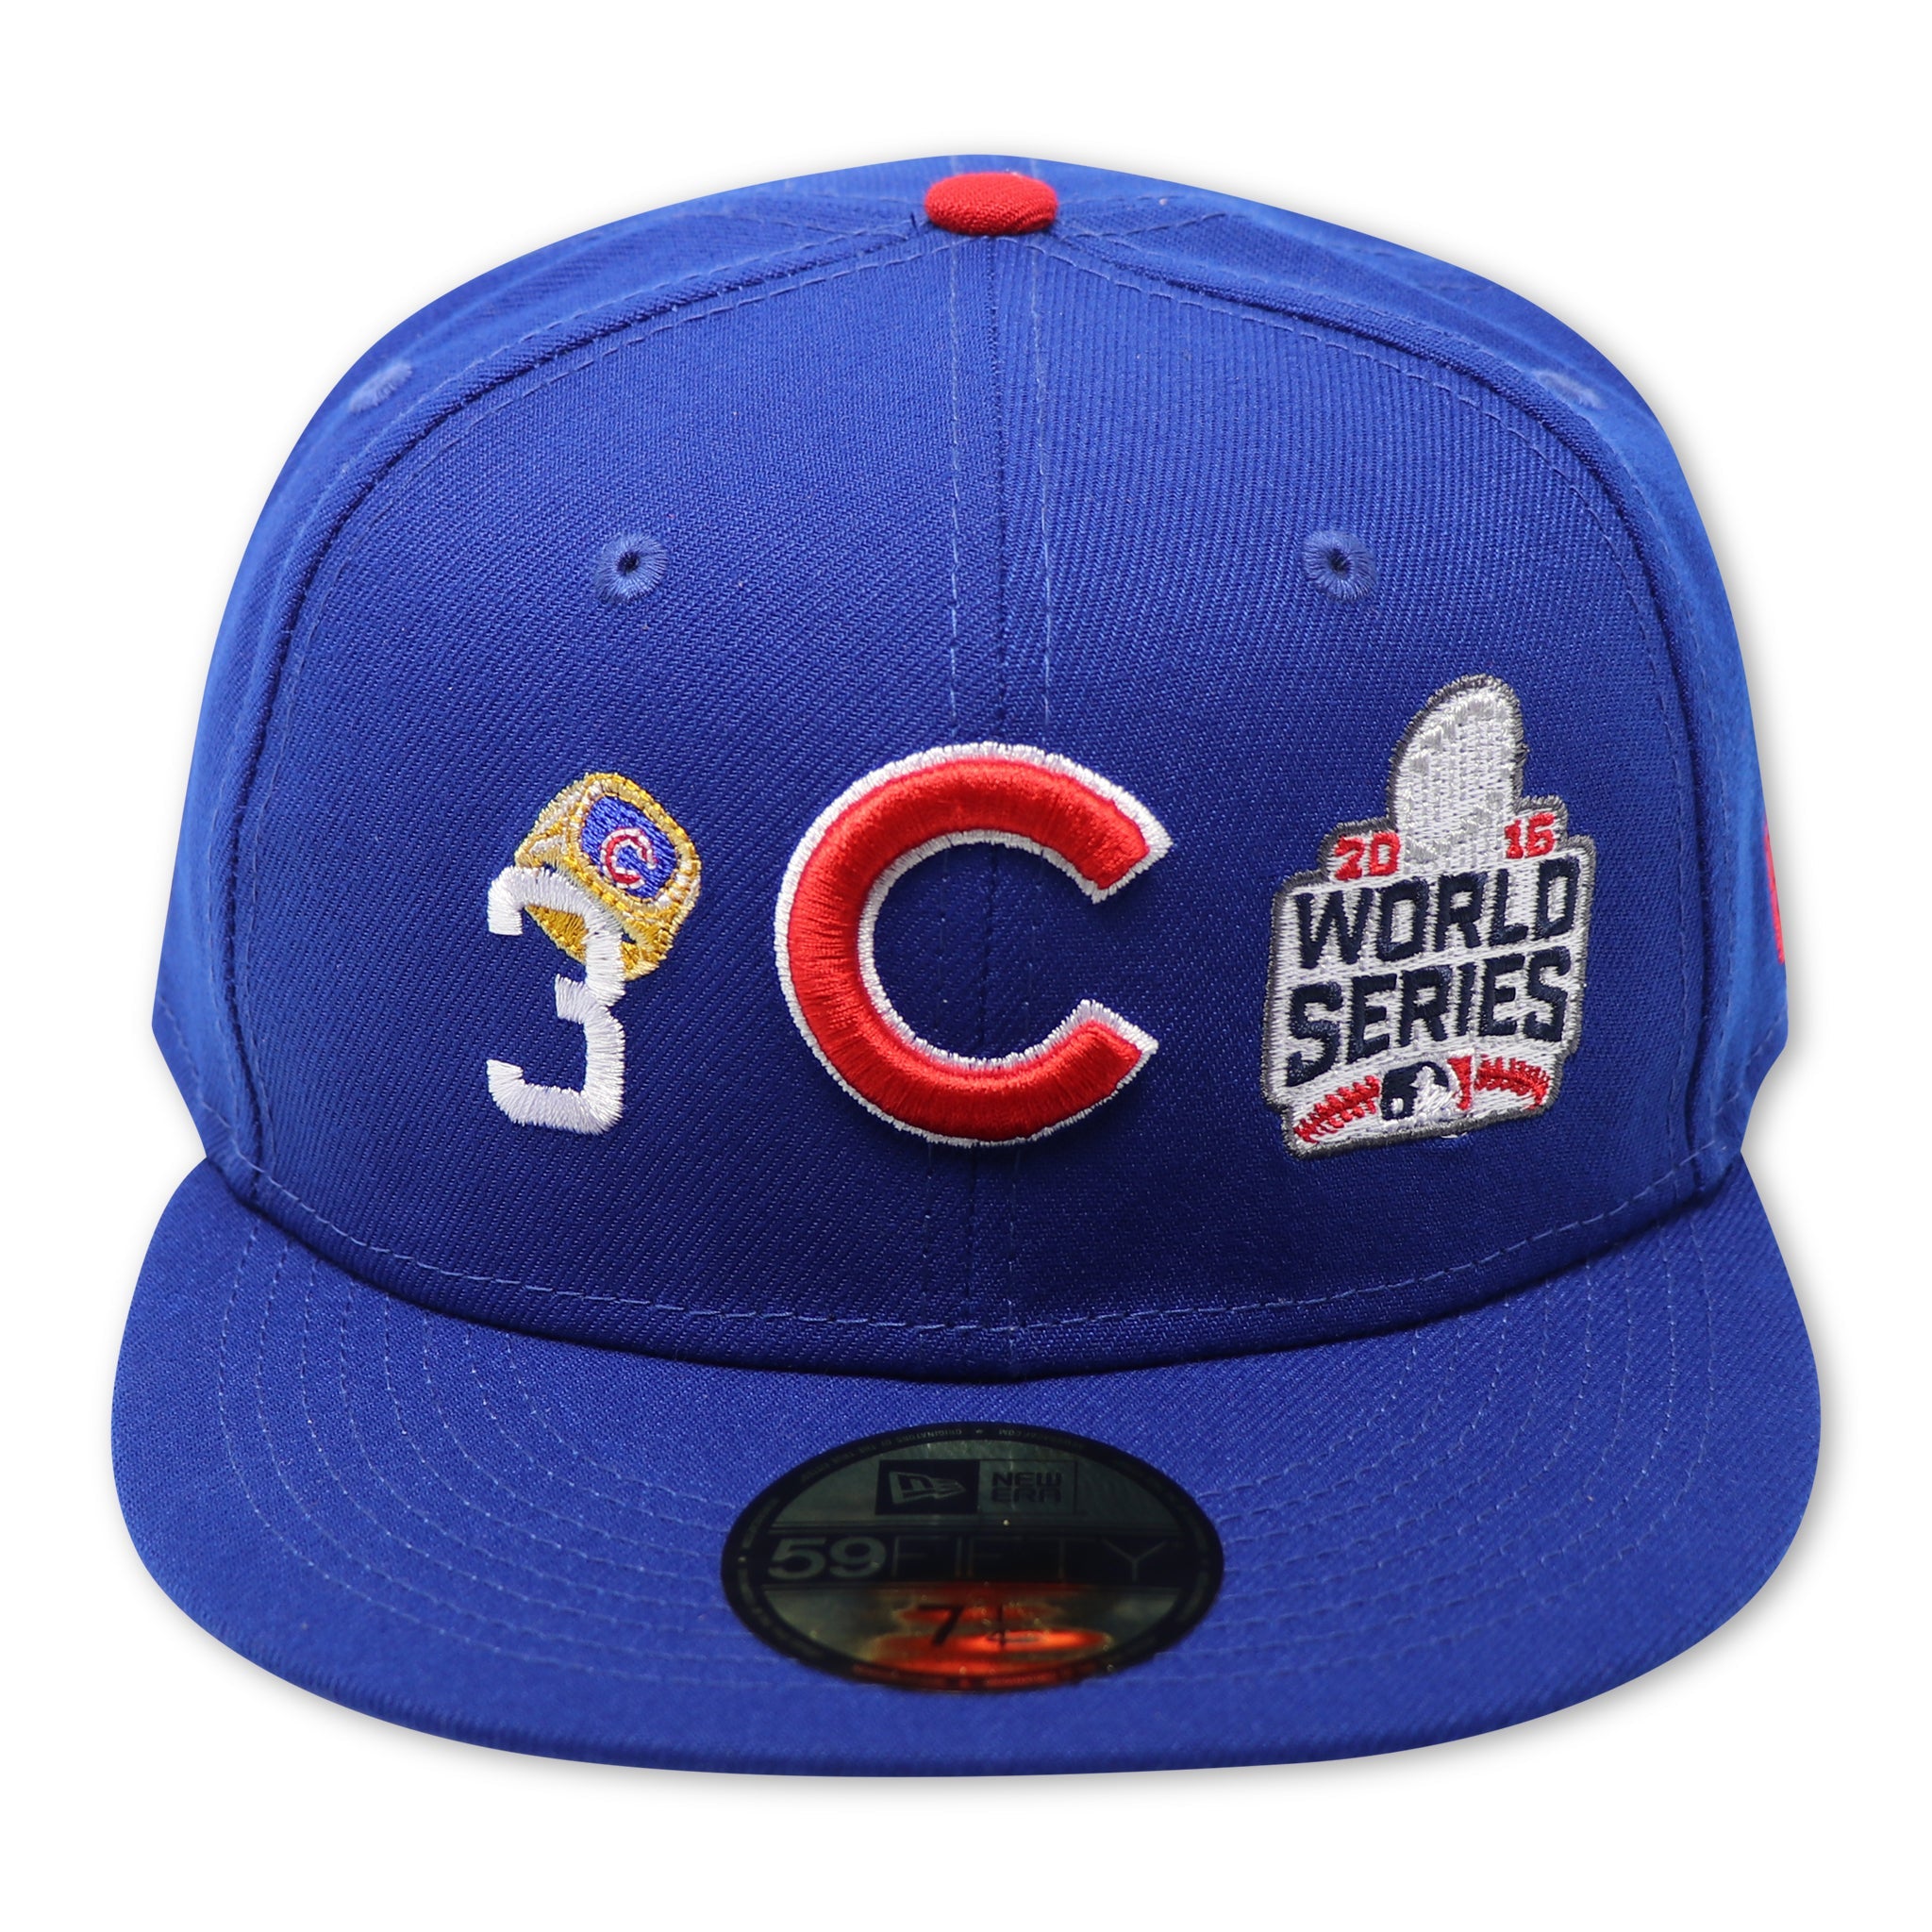 CHICAGO CUBS "COUNT THE RINGS" NEW ERA 59FIFTY FITTED